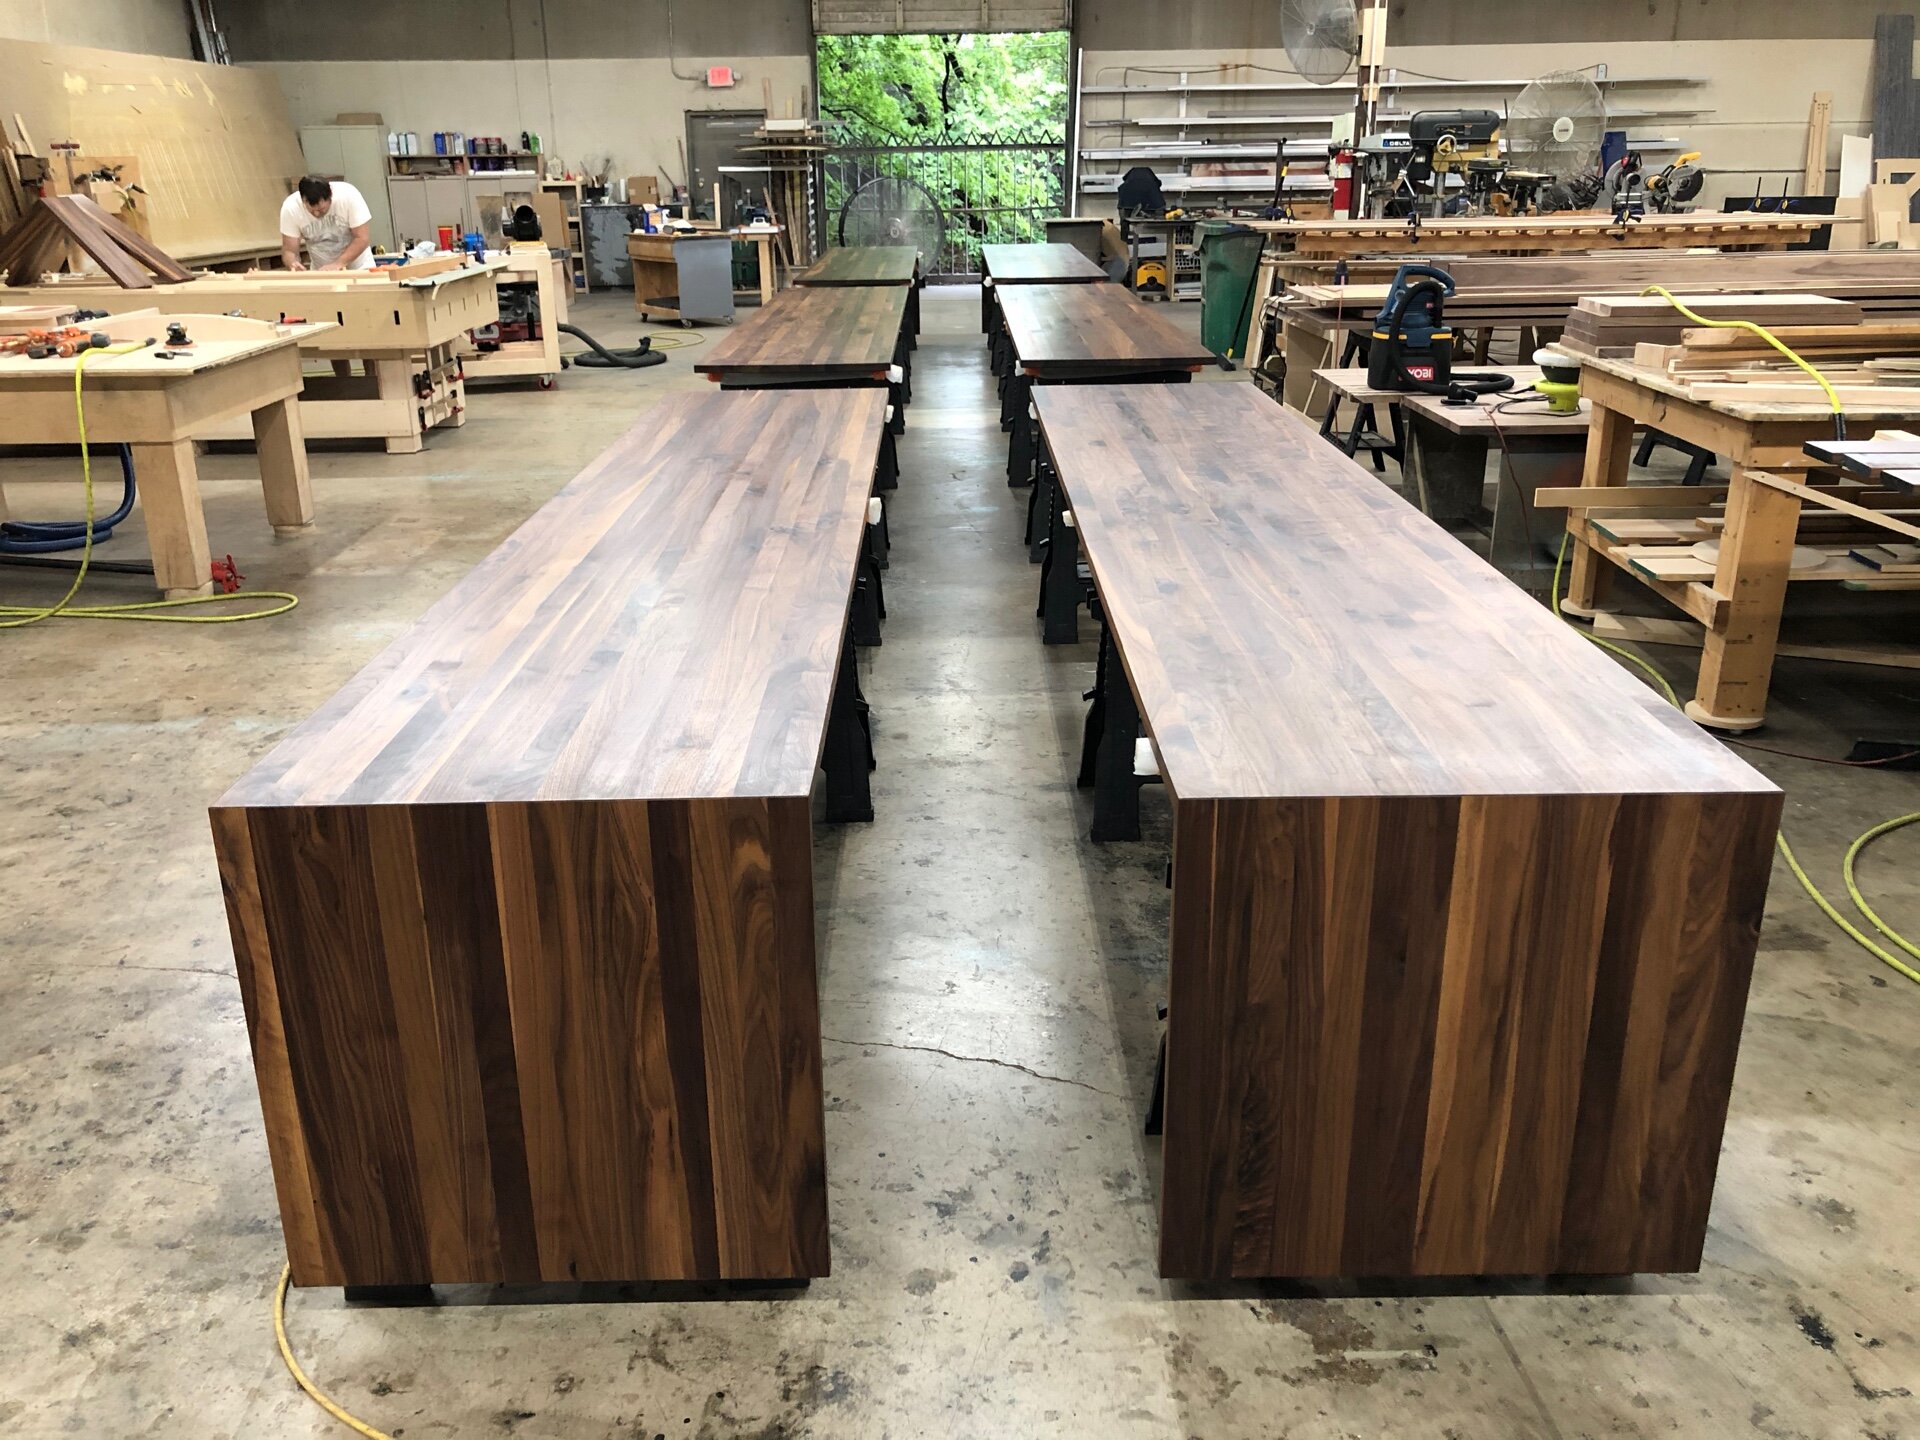 Finished table tops prior to delivery